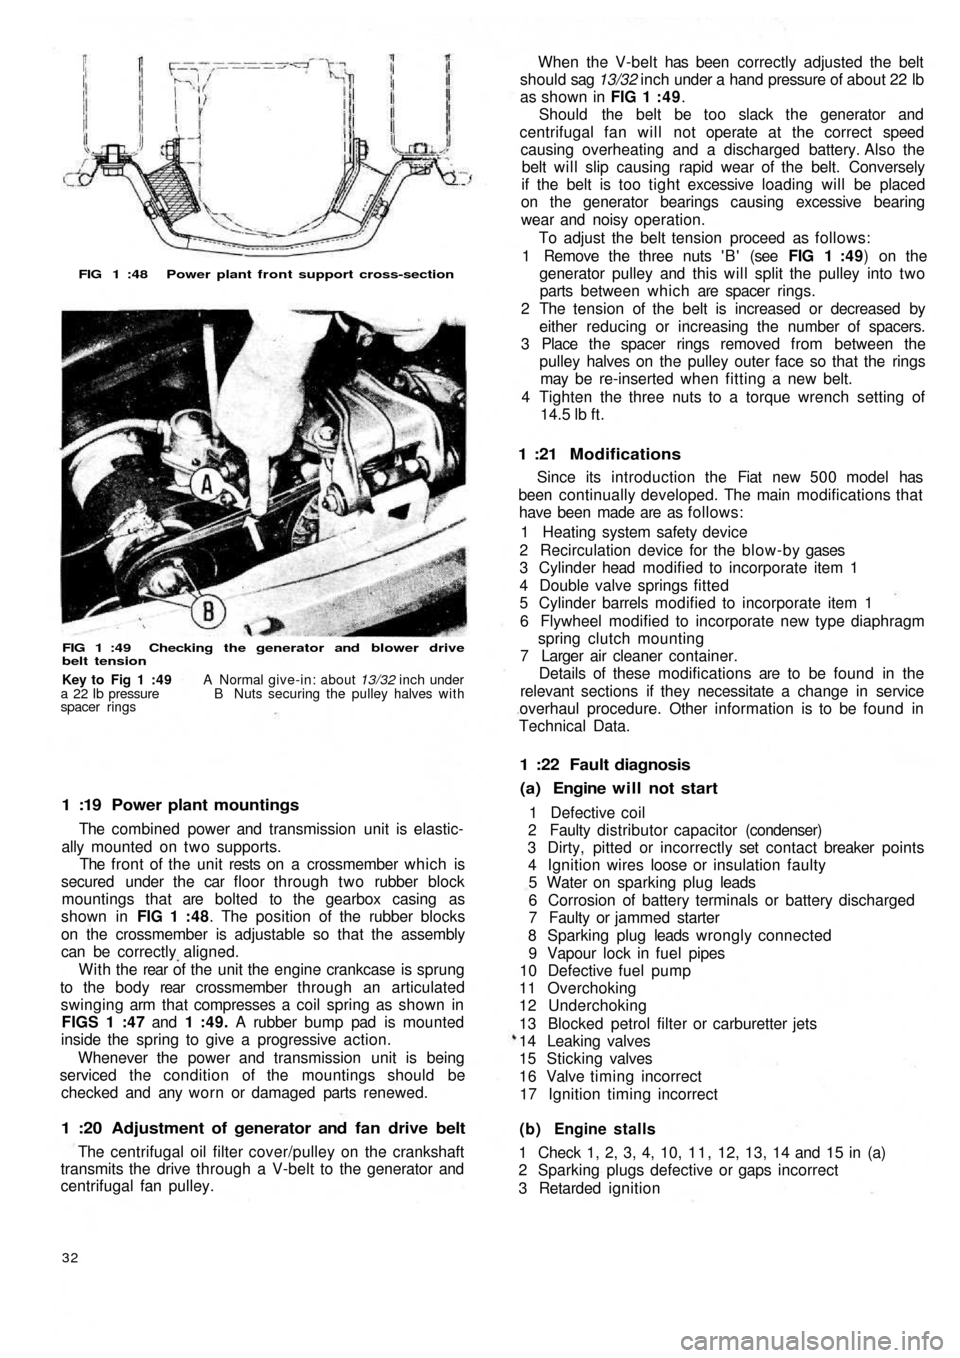 FIAT 500 1970 1.G Workshop Manual FIG 1 :48  Power plant front support cross-section
FIG 1 :49  Checking  the generator and  blower drive
belt tension
1 :19  Power plant mountings
The combined power and transmission unit is elastic-
a